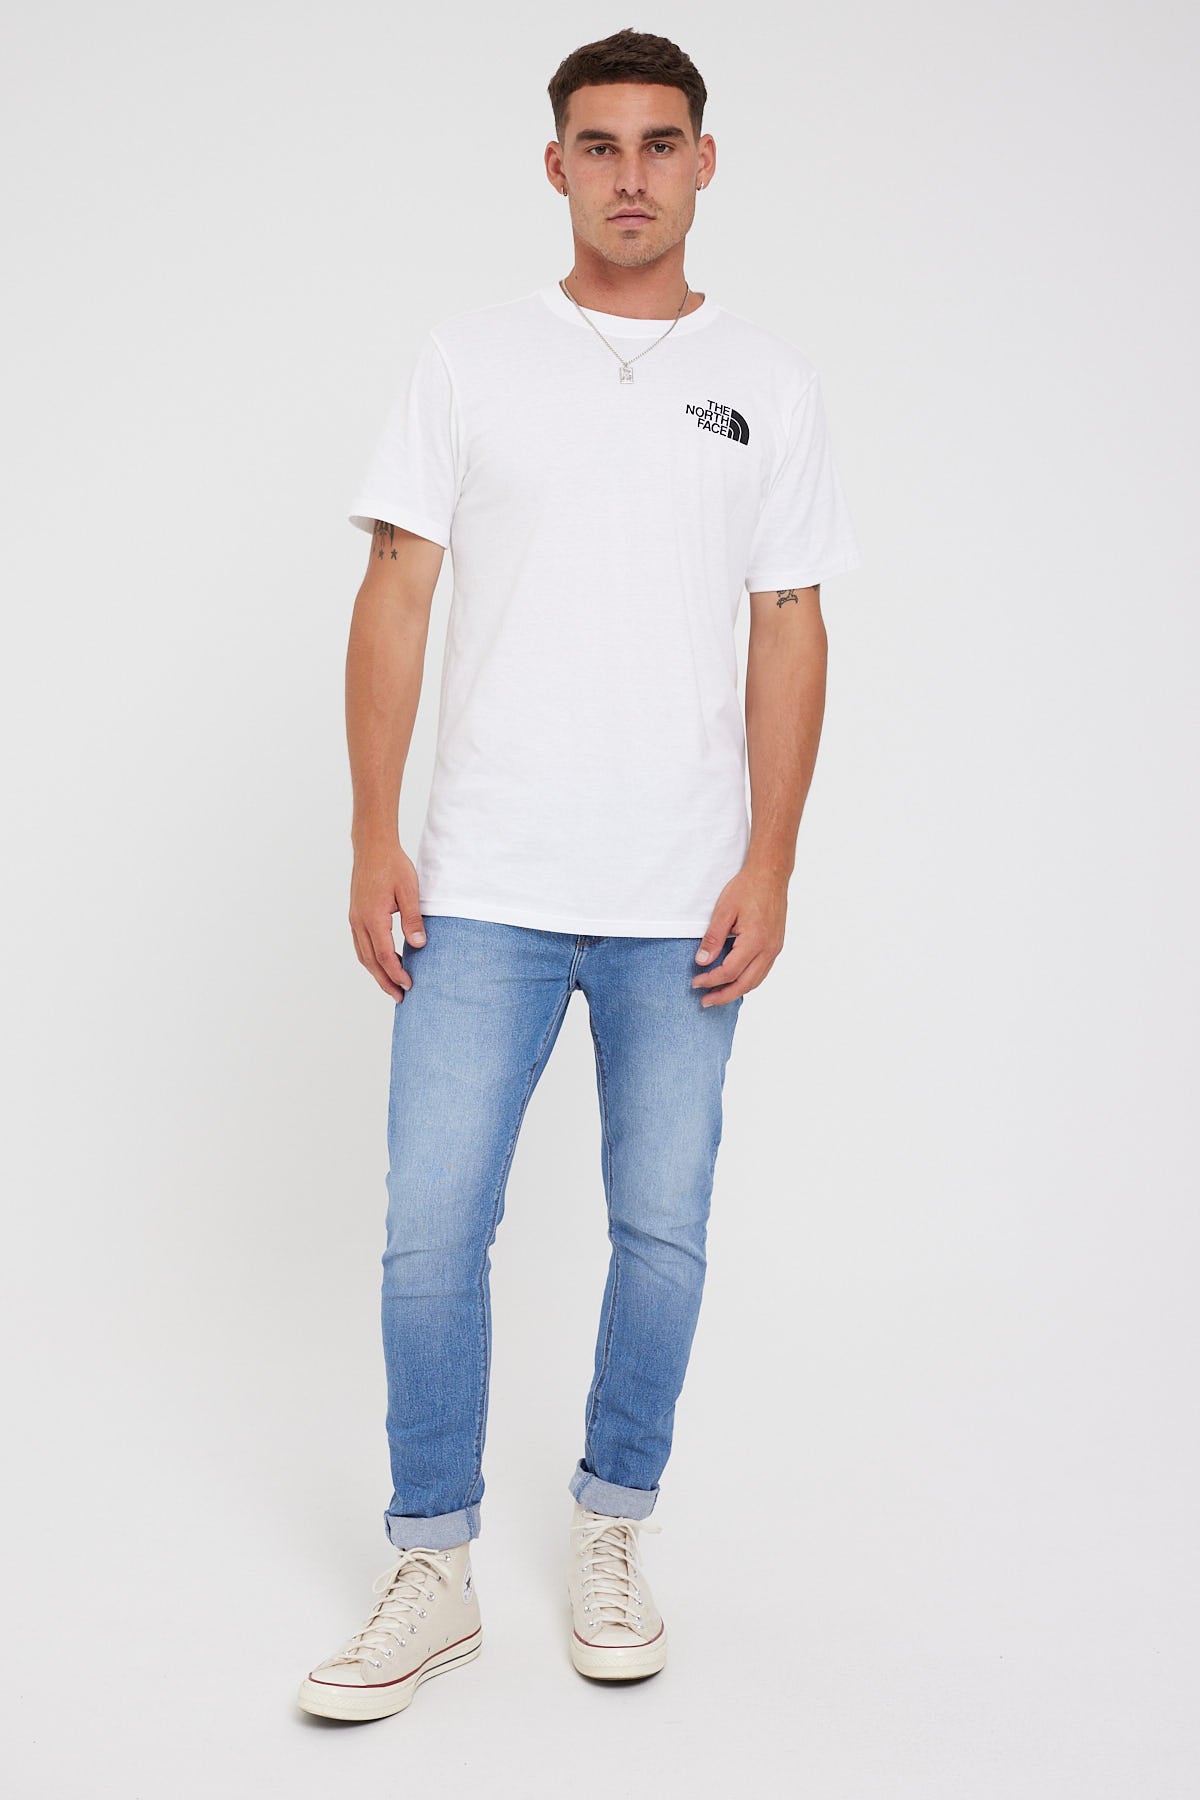 The North Face Box NSE Tee White/black